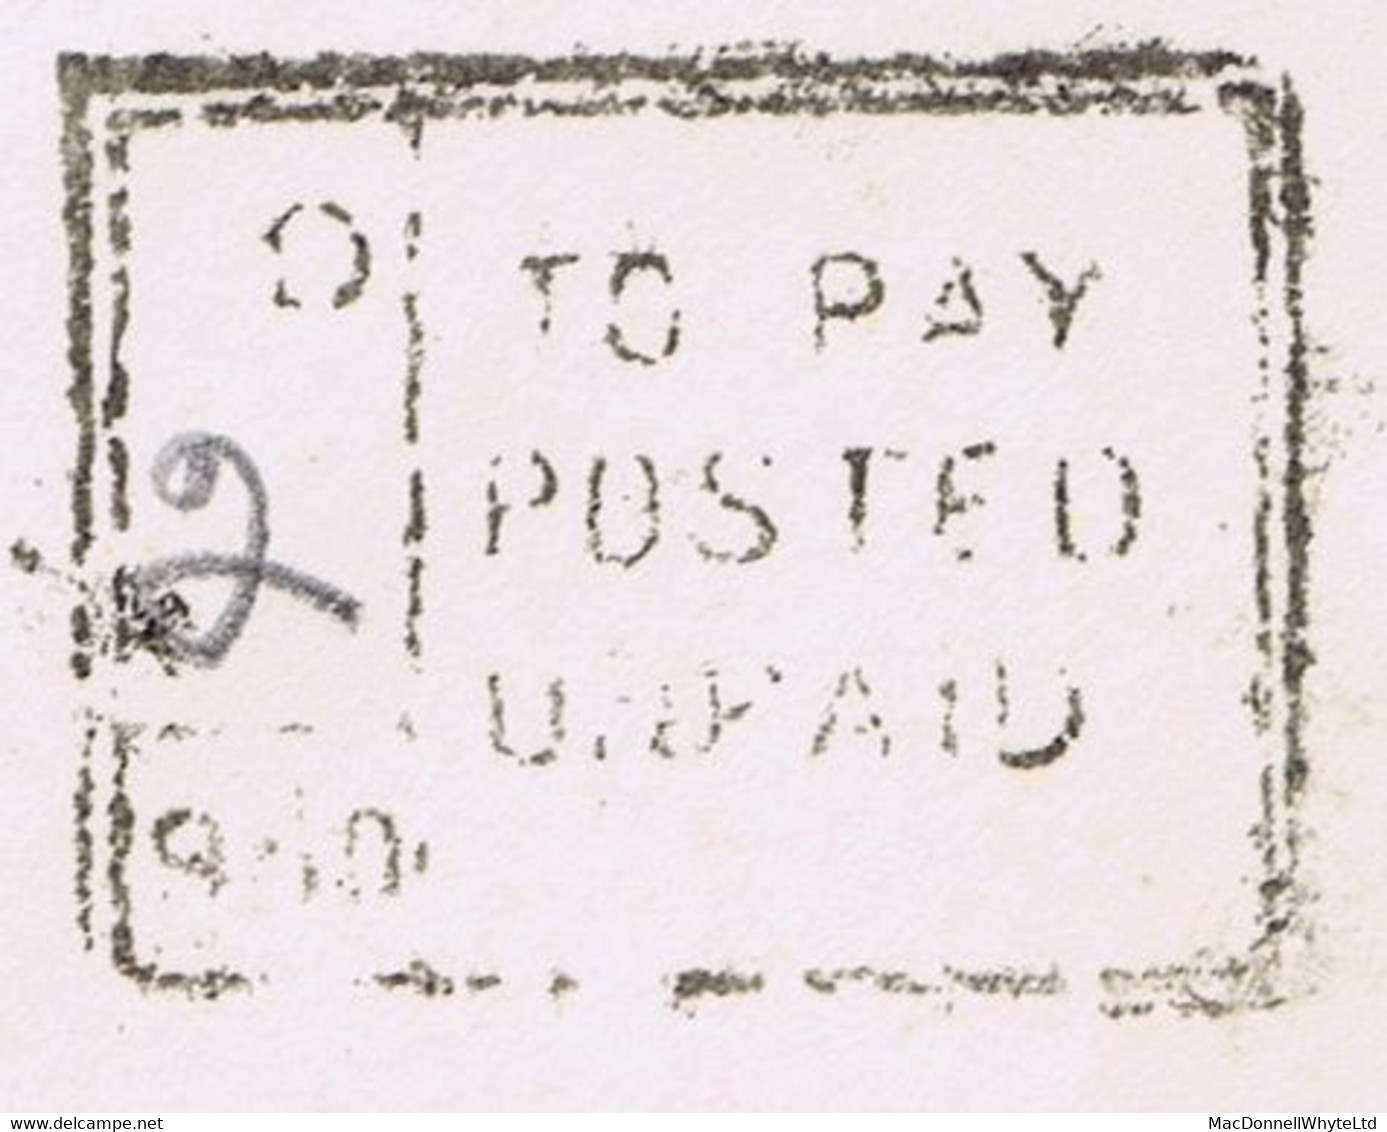 Ireland Postage Due 1950 Cover From Bray To Cork Posted Unpaid "2D TO PAY" And BRI CHUALANN Cds - Portomarken